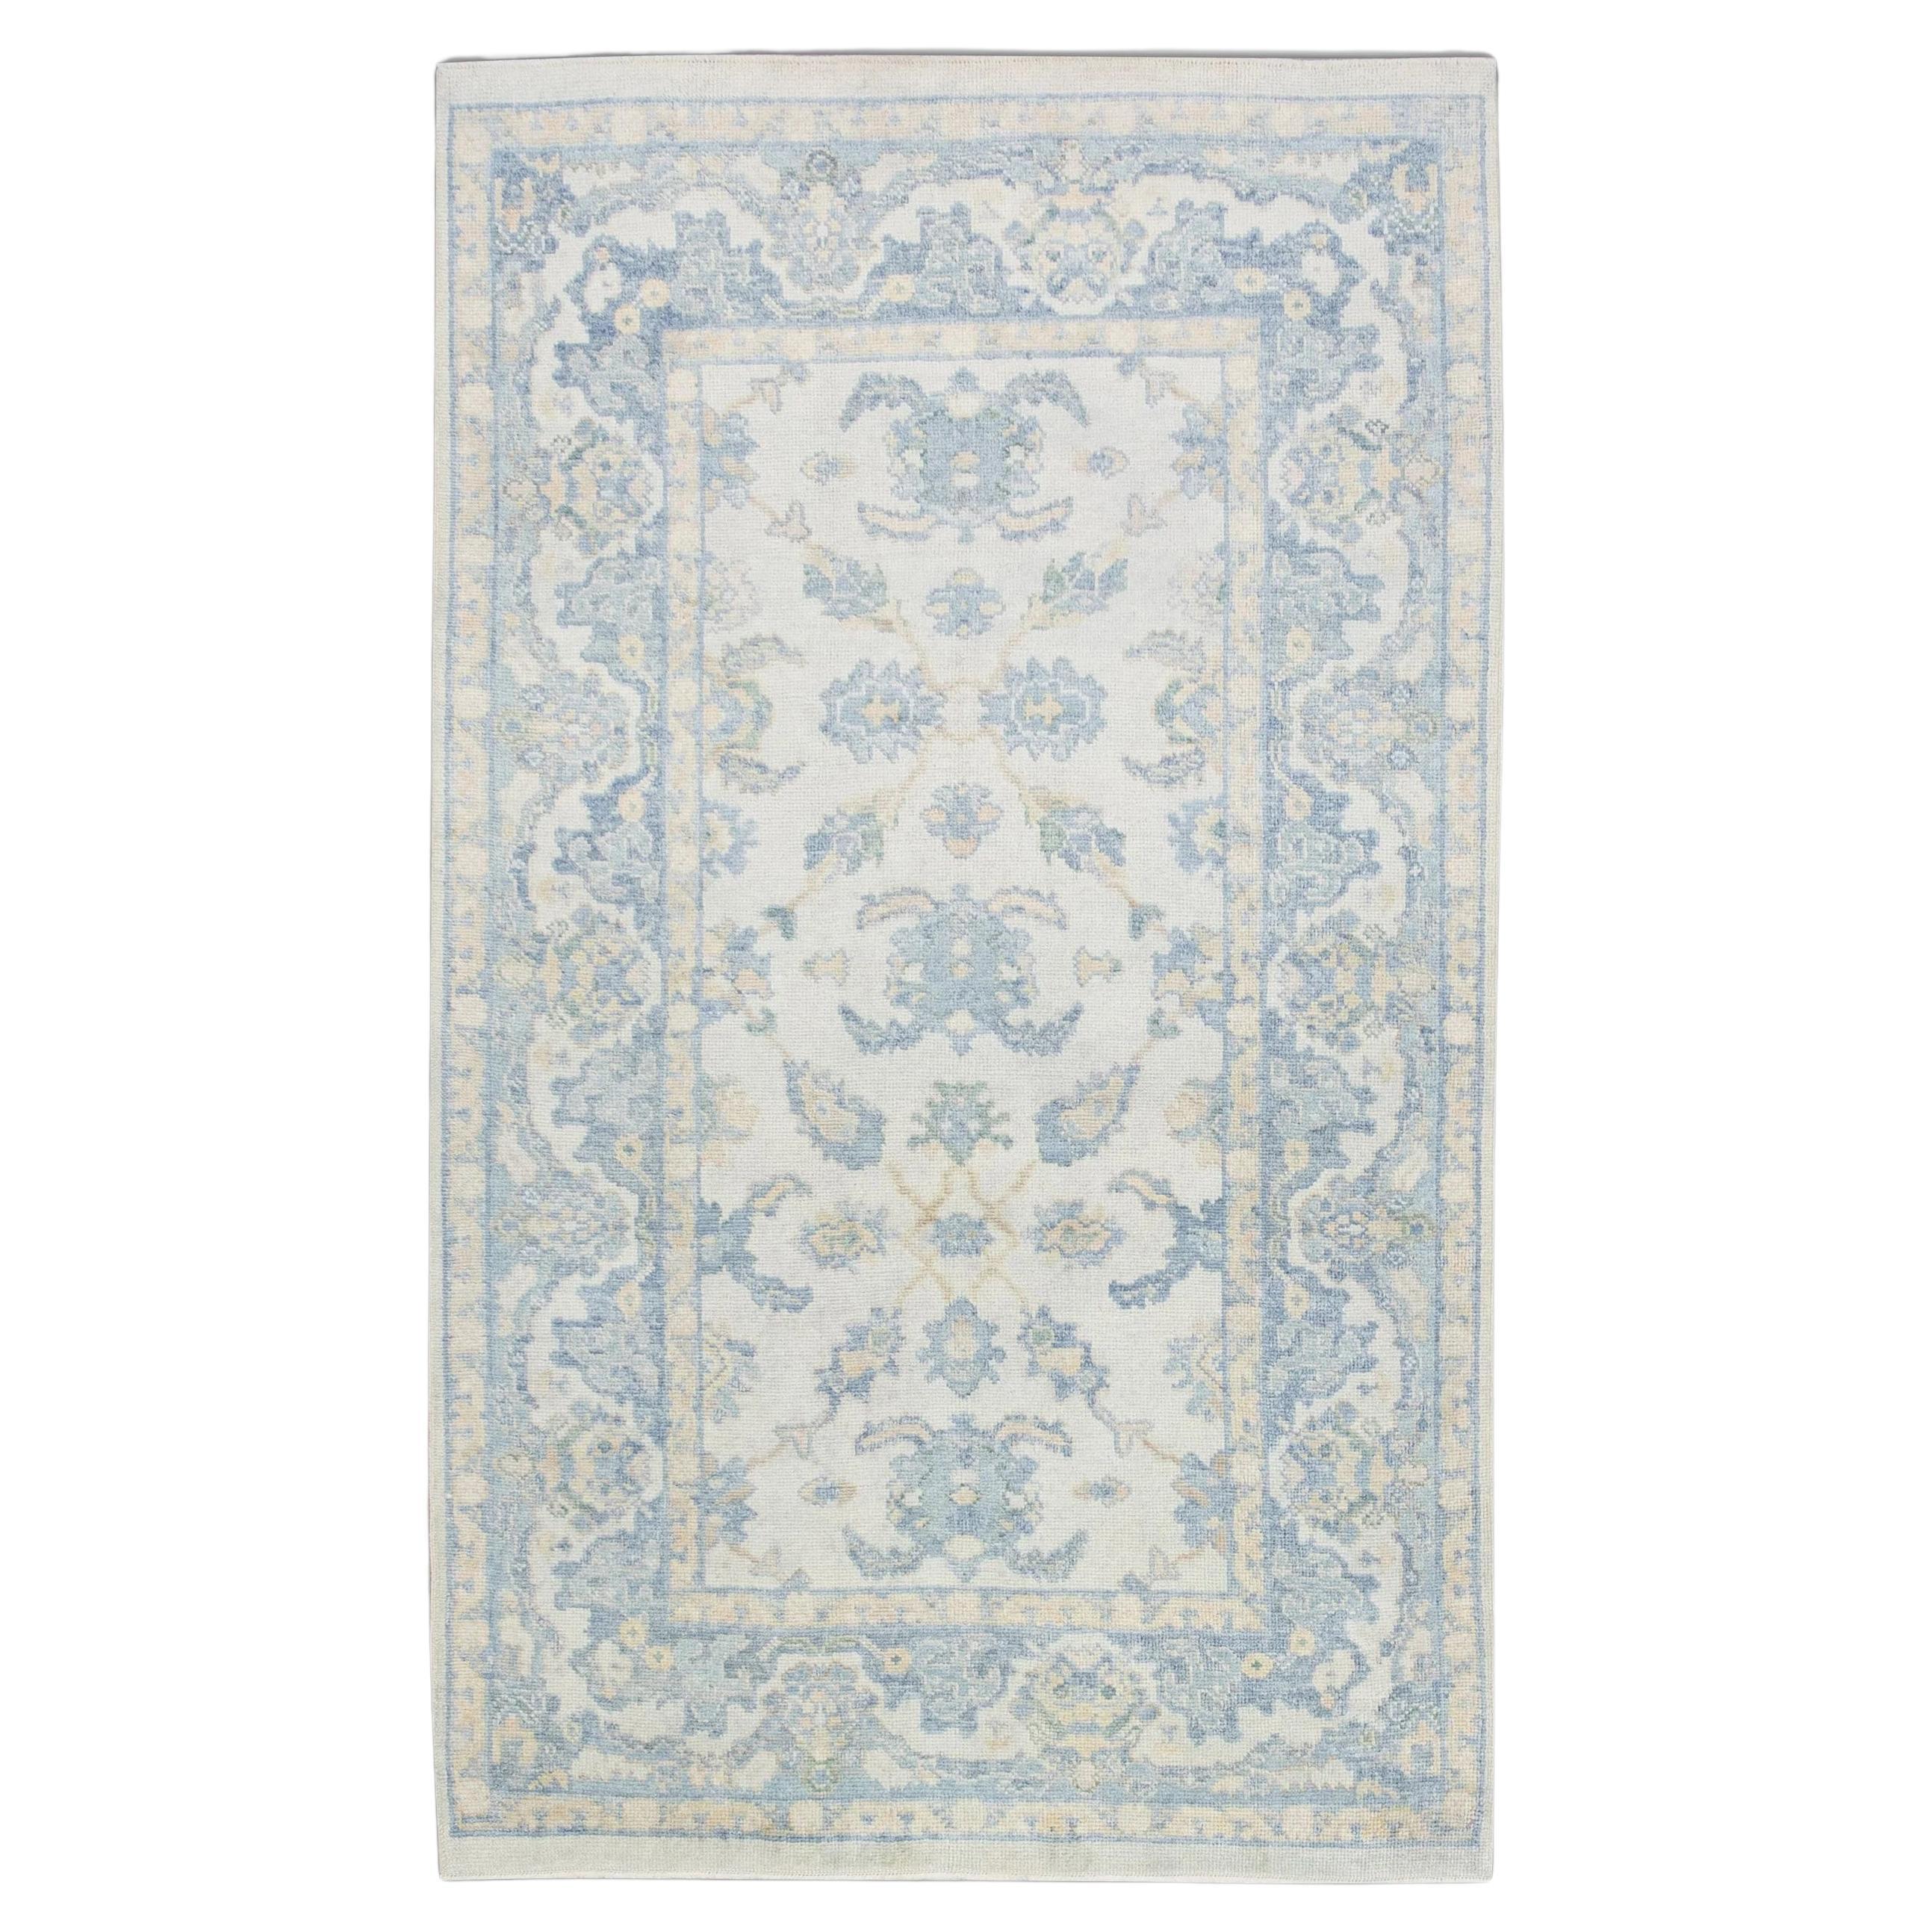 Soft Blue Handwoven Wool Turkish Oushak Rug with Floral Design 5' x 8'2" For Sale